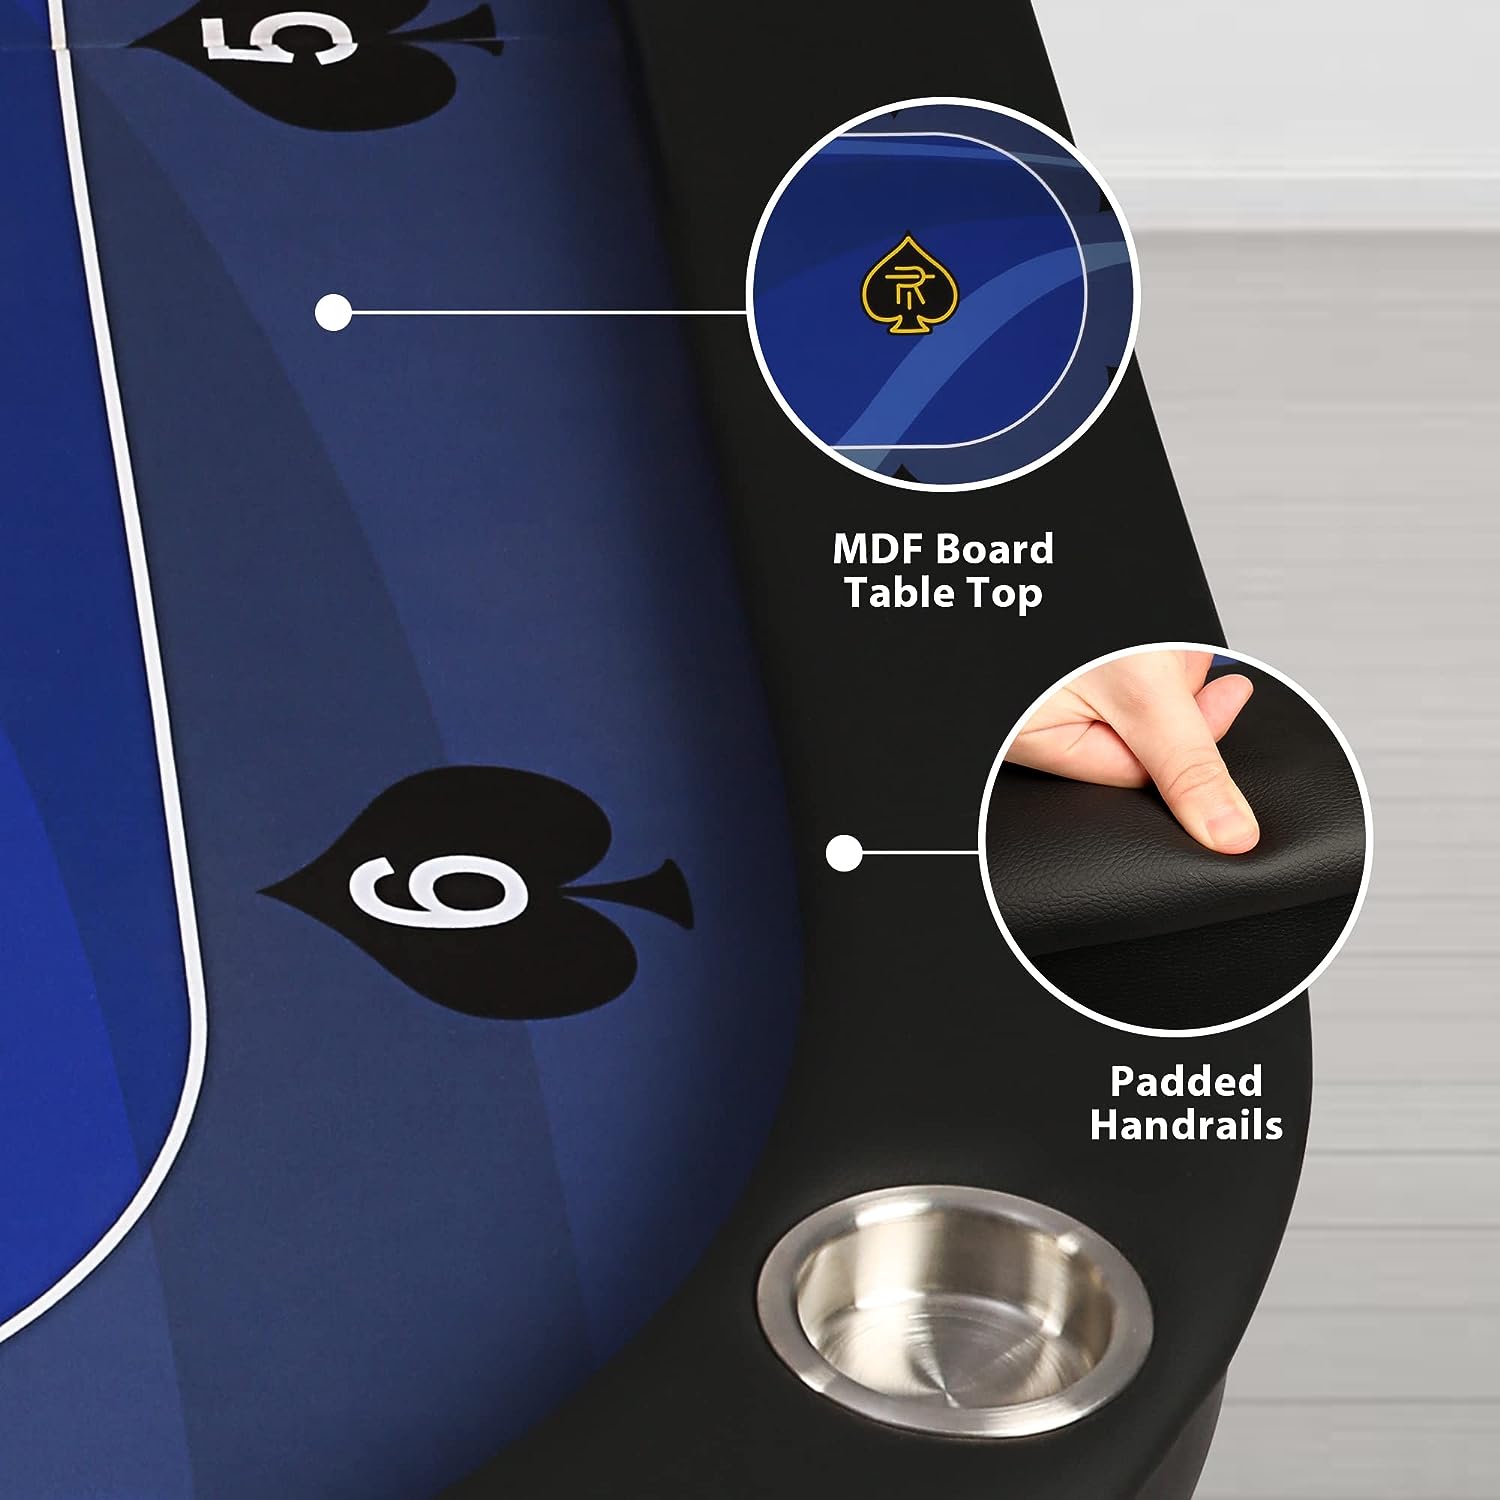 84" Folding Poker Table 10 Player Card Table with 10 Cup Holder for Texas Casino, Blue